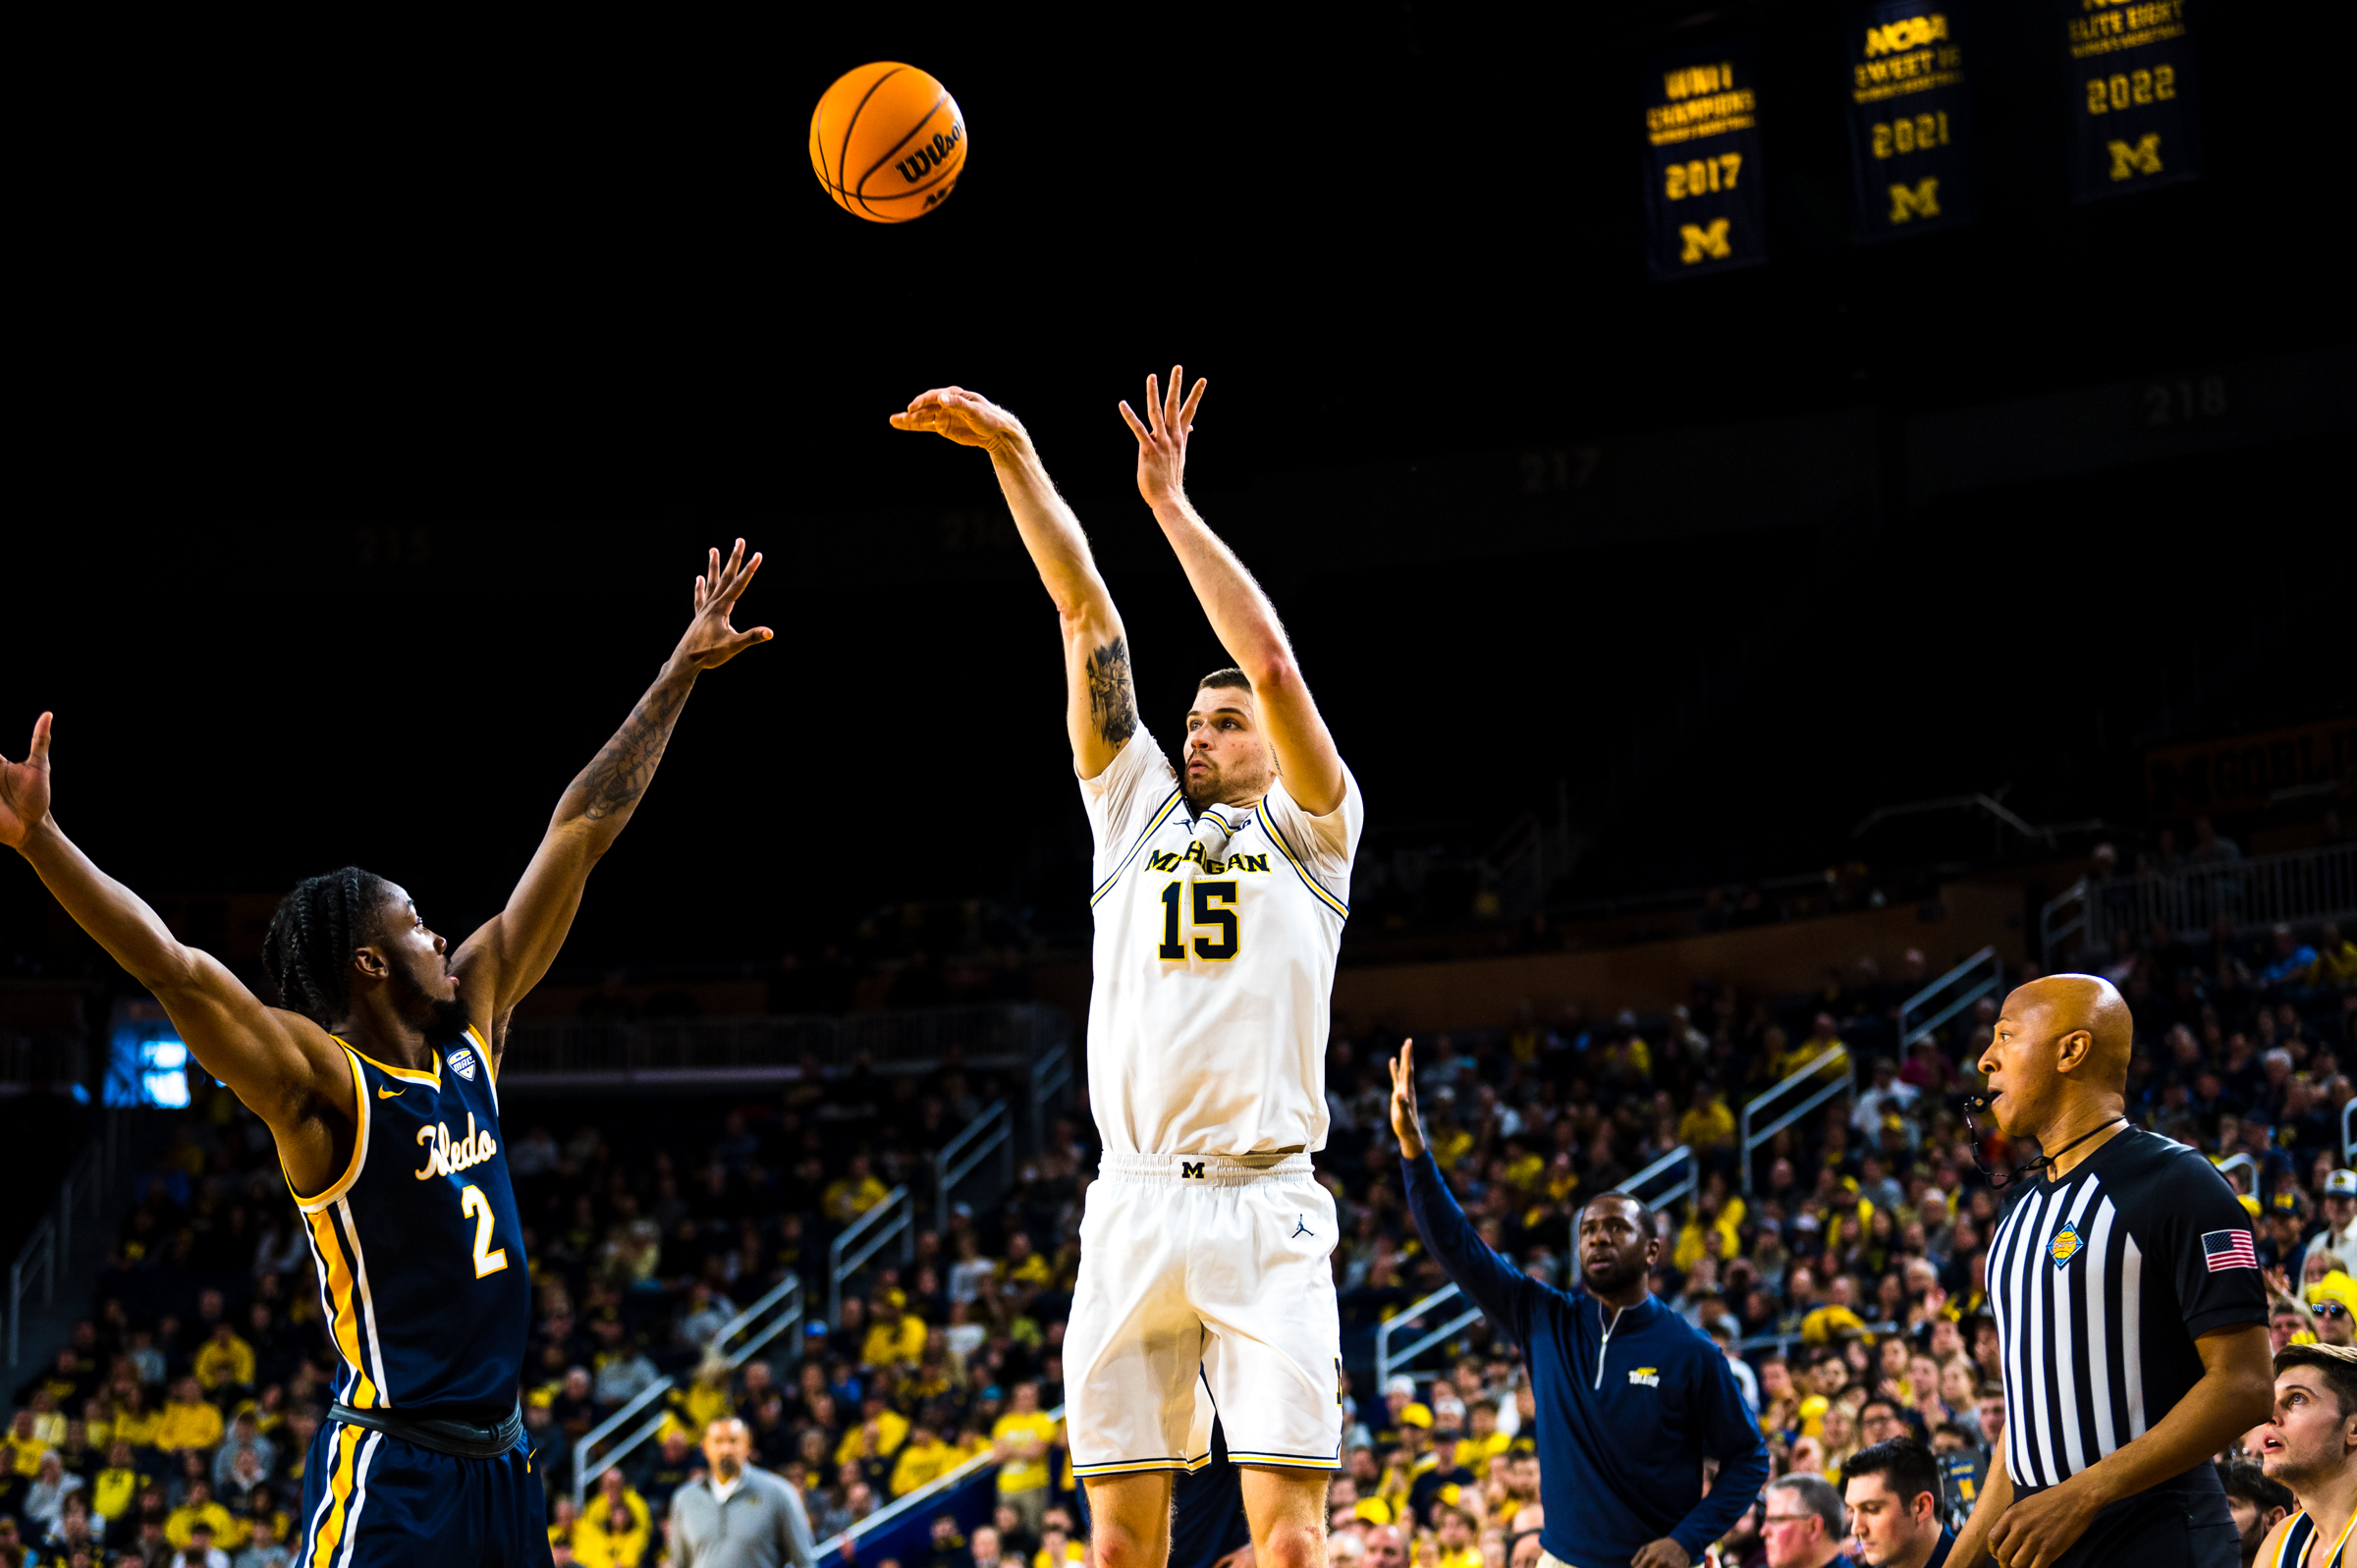 Joey Baker launches season-best performance against Toledo to open NIT